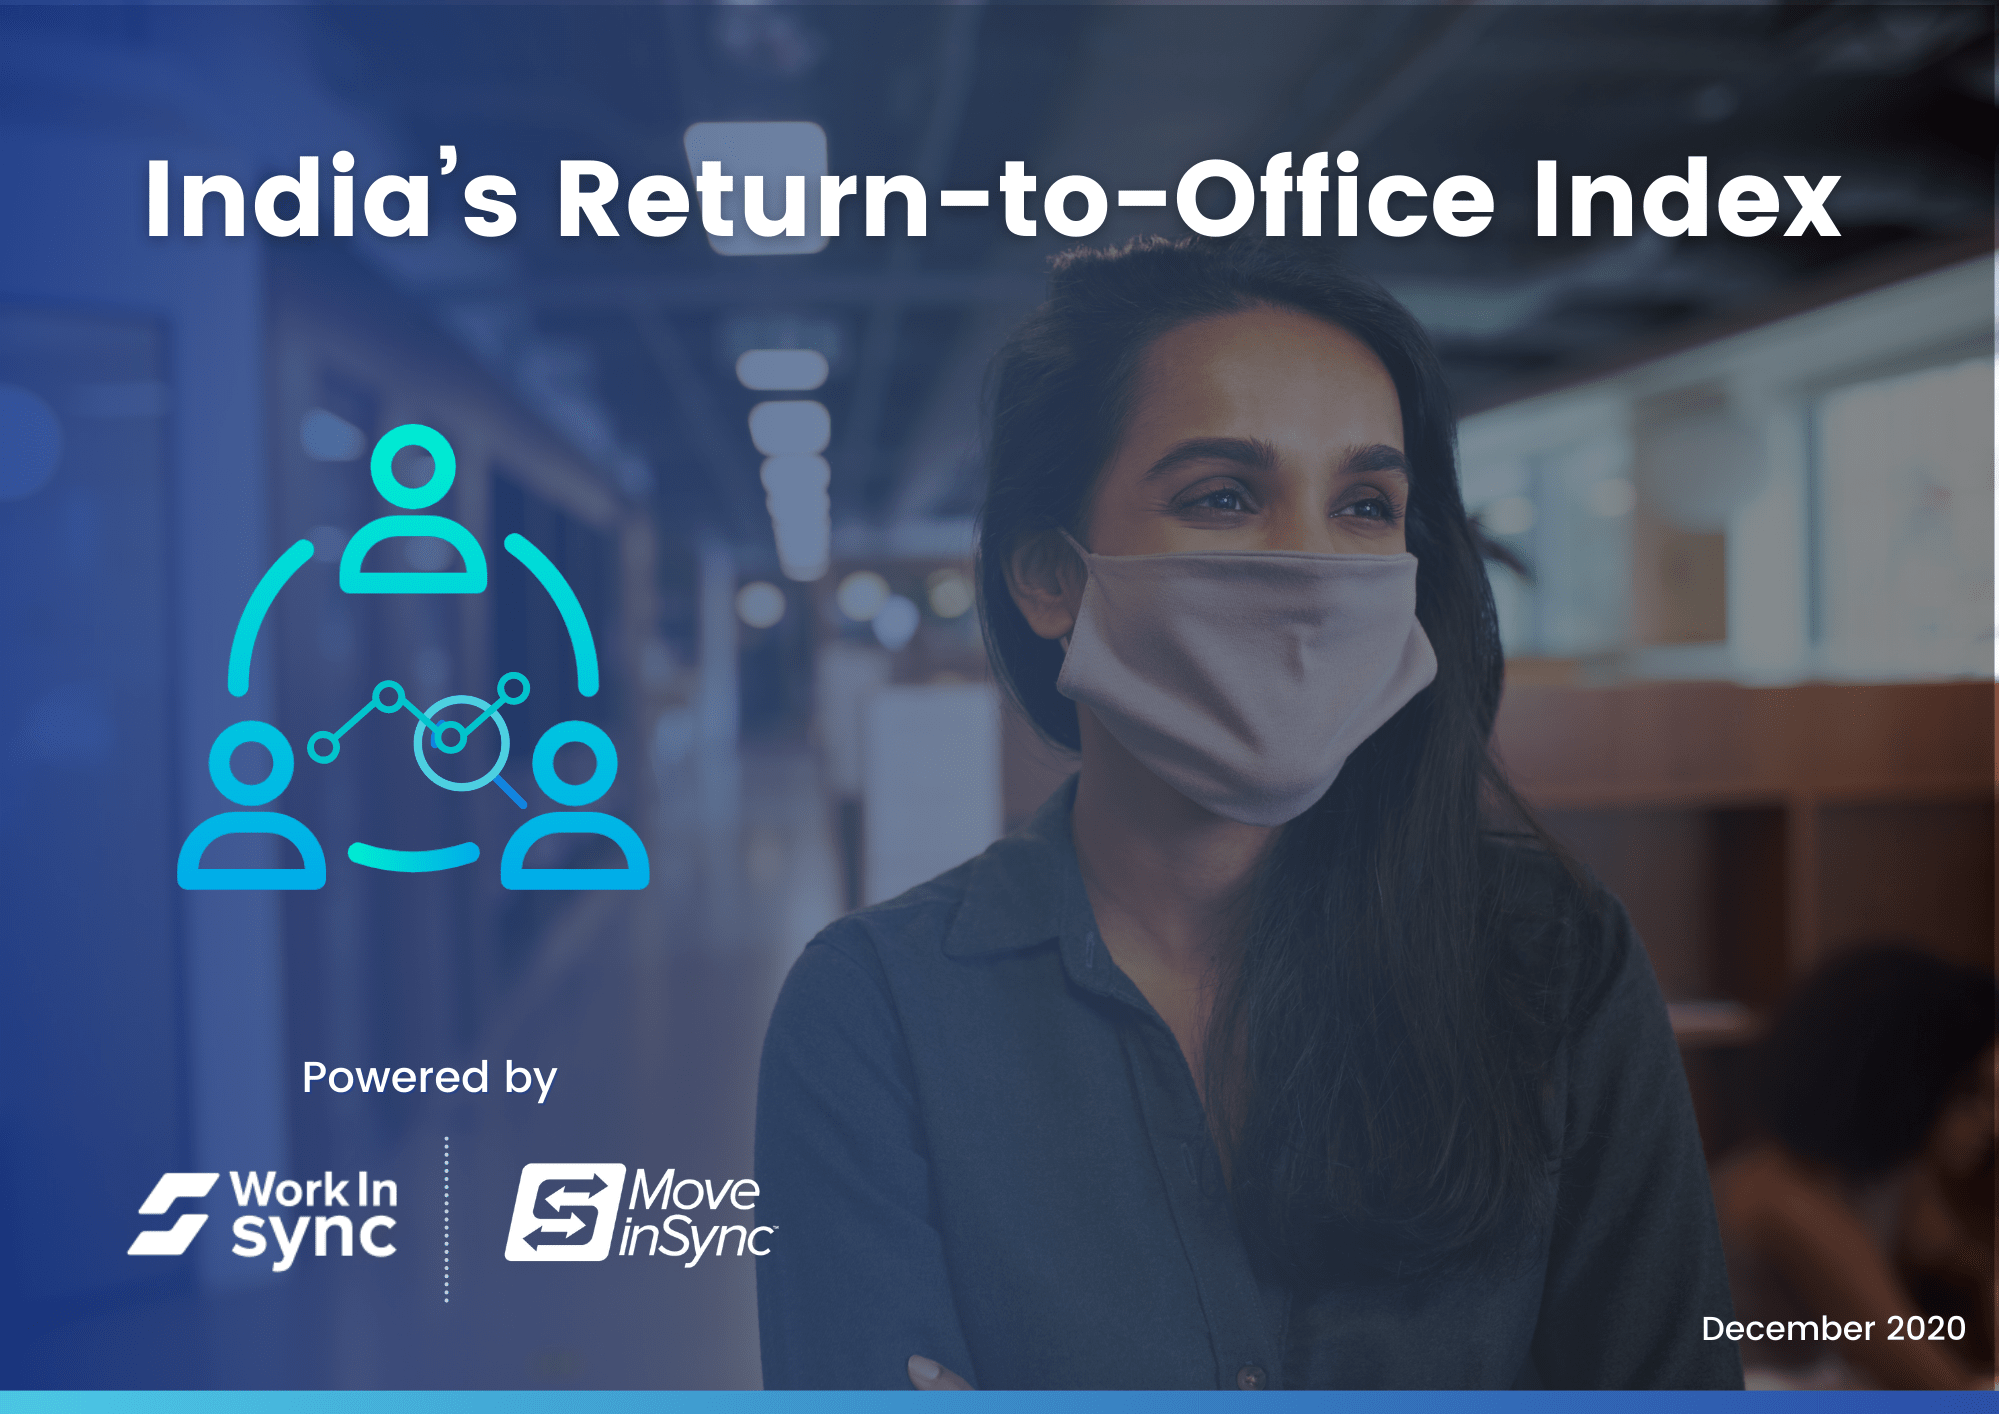 India’s Return-to-Office Index